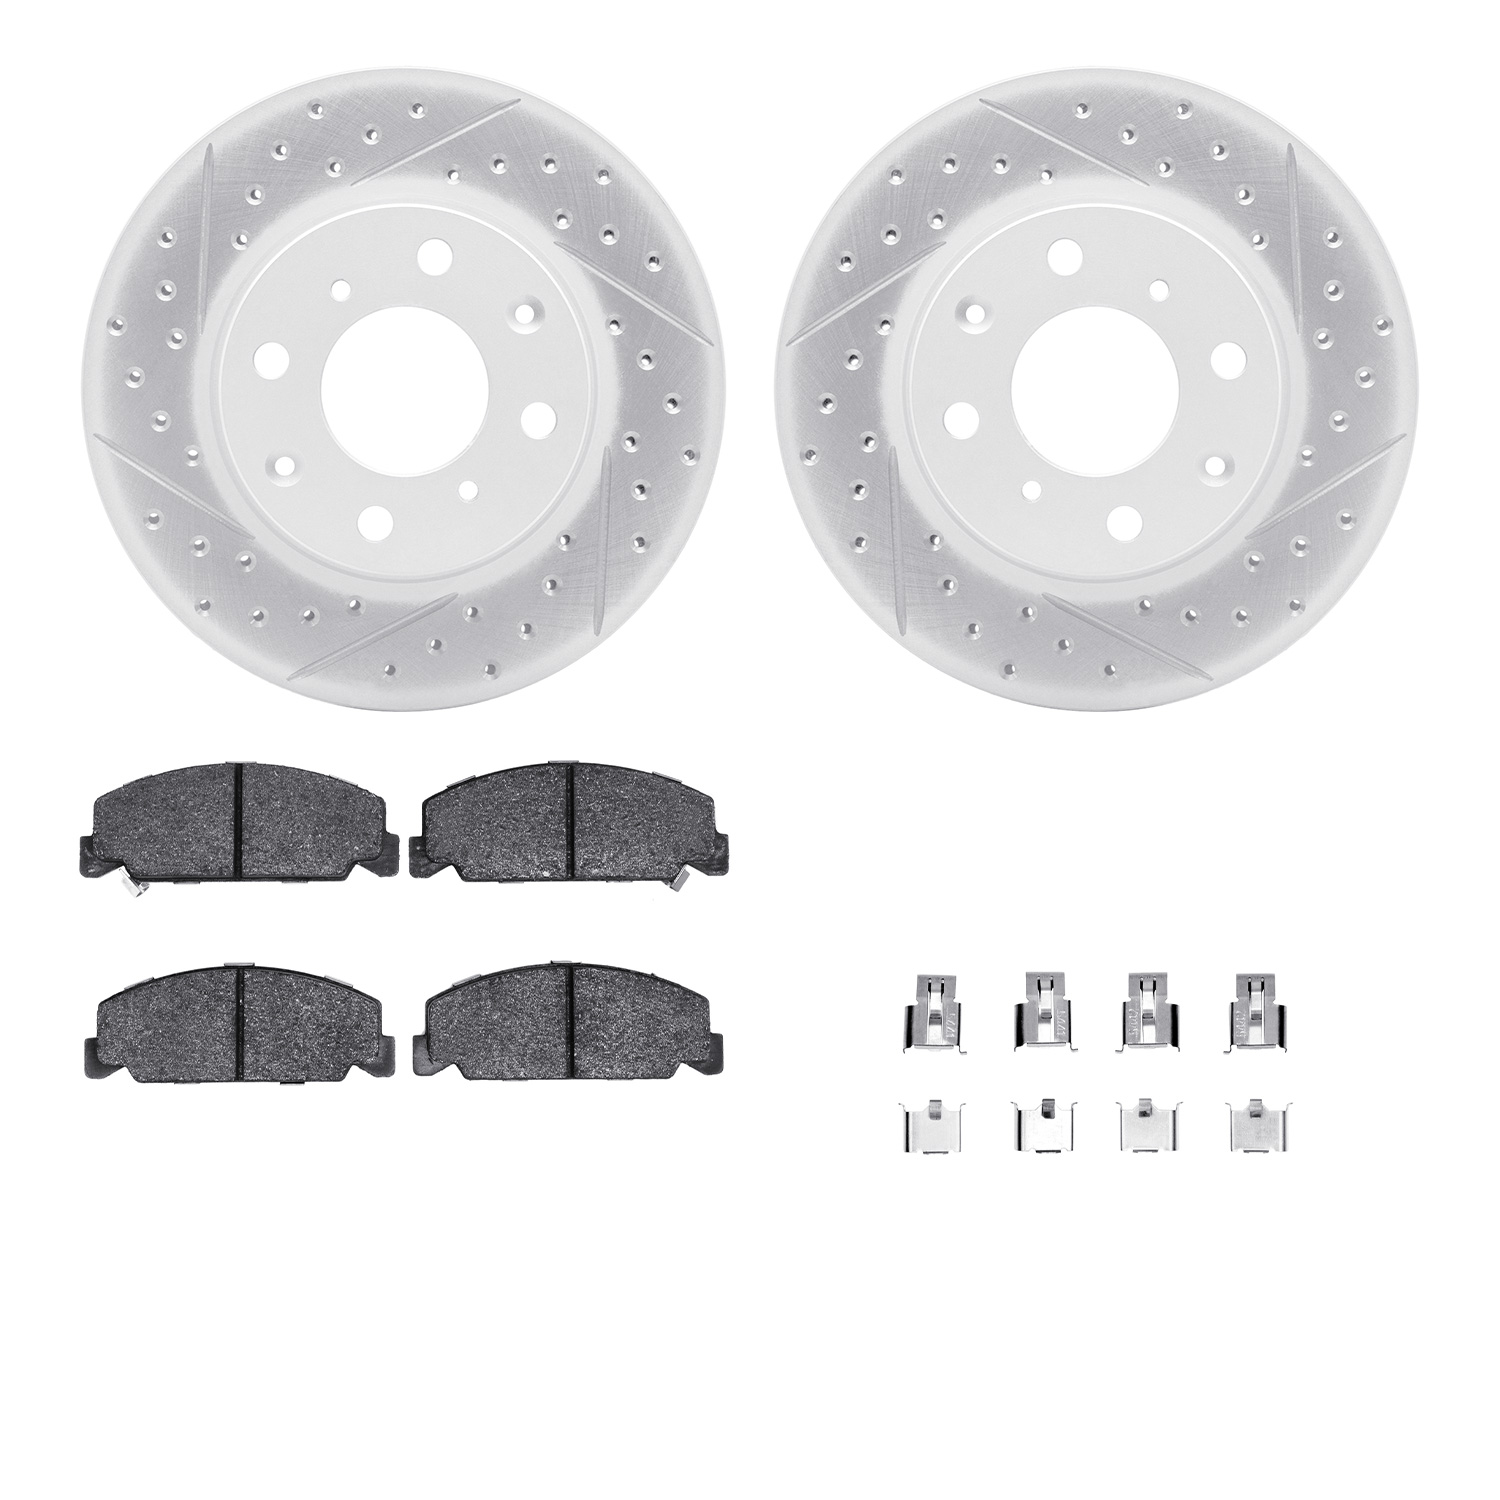 2512-59015 Geoperformance Drilled/Slotted Rotors w/5000 Advanced Brake Pads Kit & Hardware, 1990-2000 Acura/Honda, Position: Fro